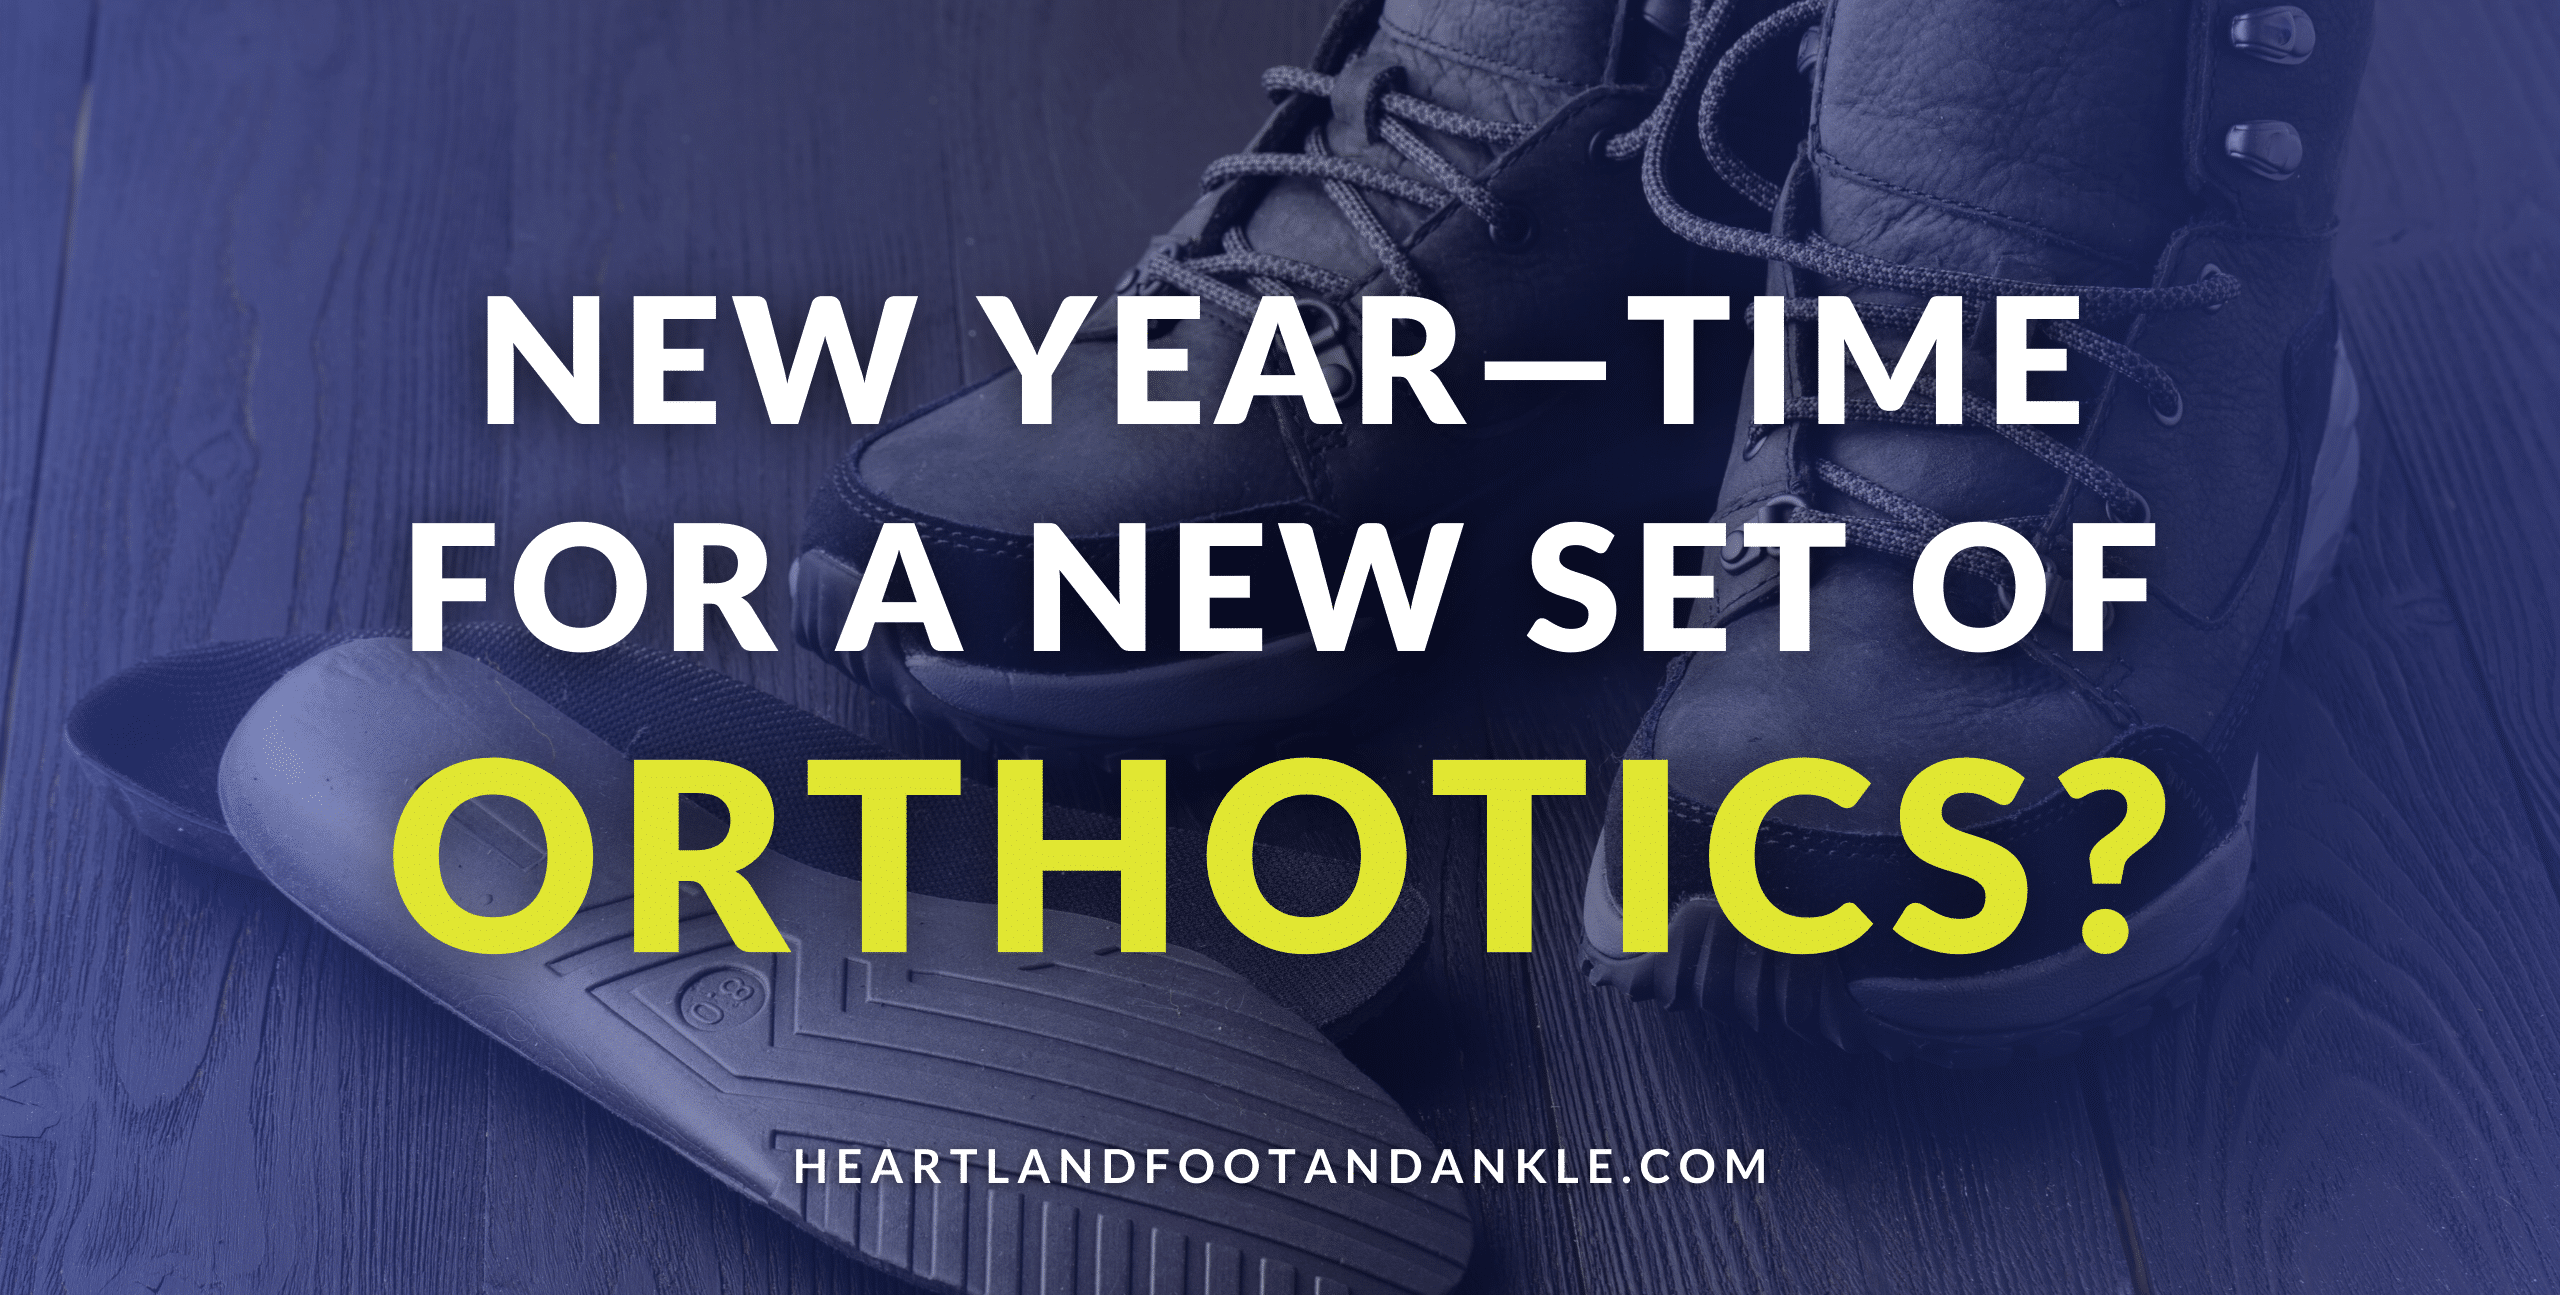 New Year—Time for a New Set of Orthotics